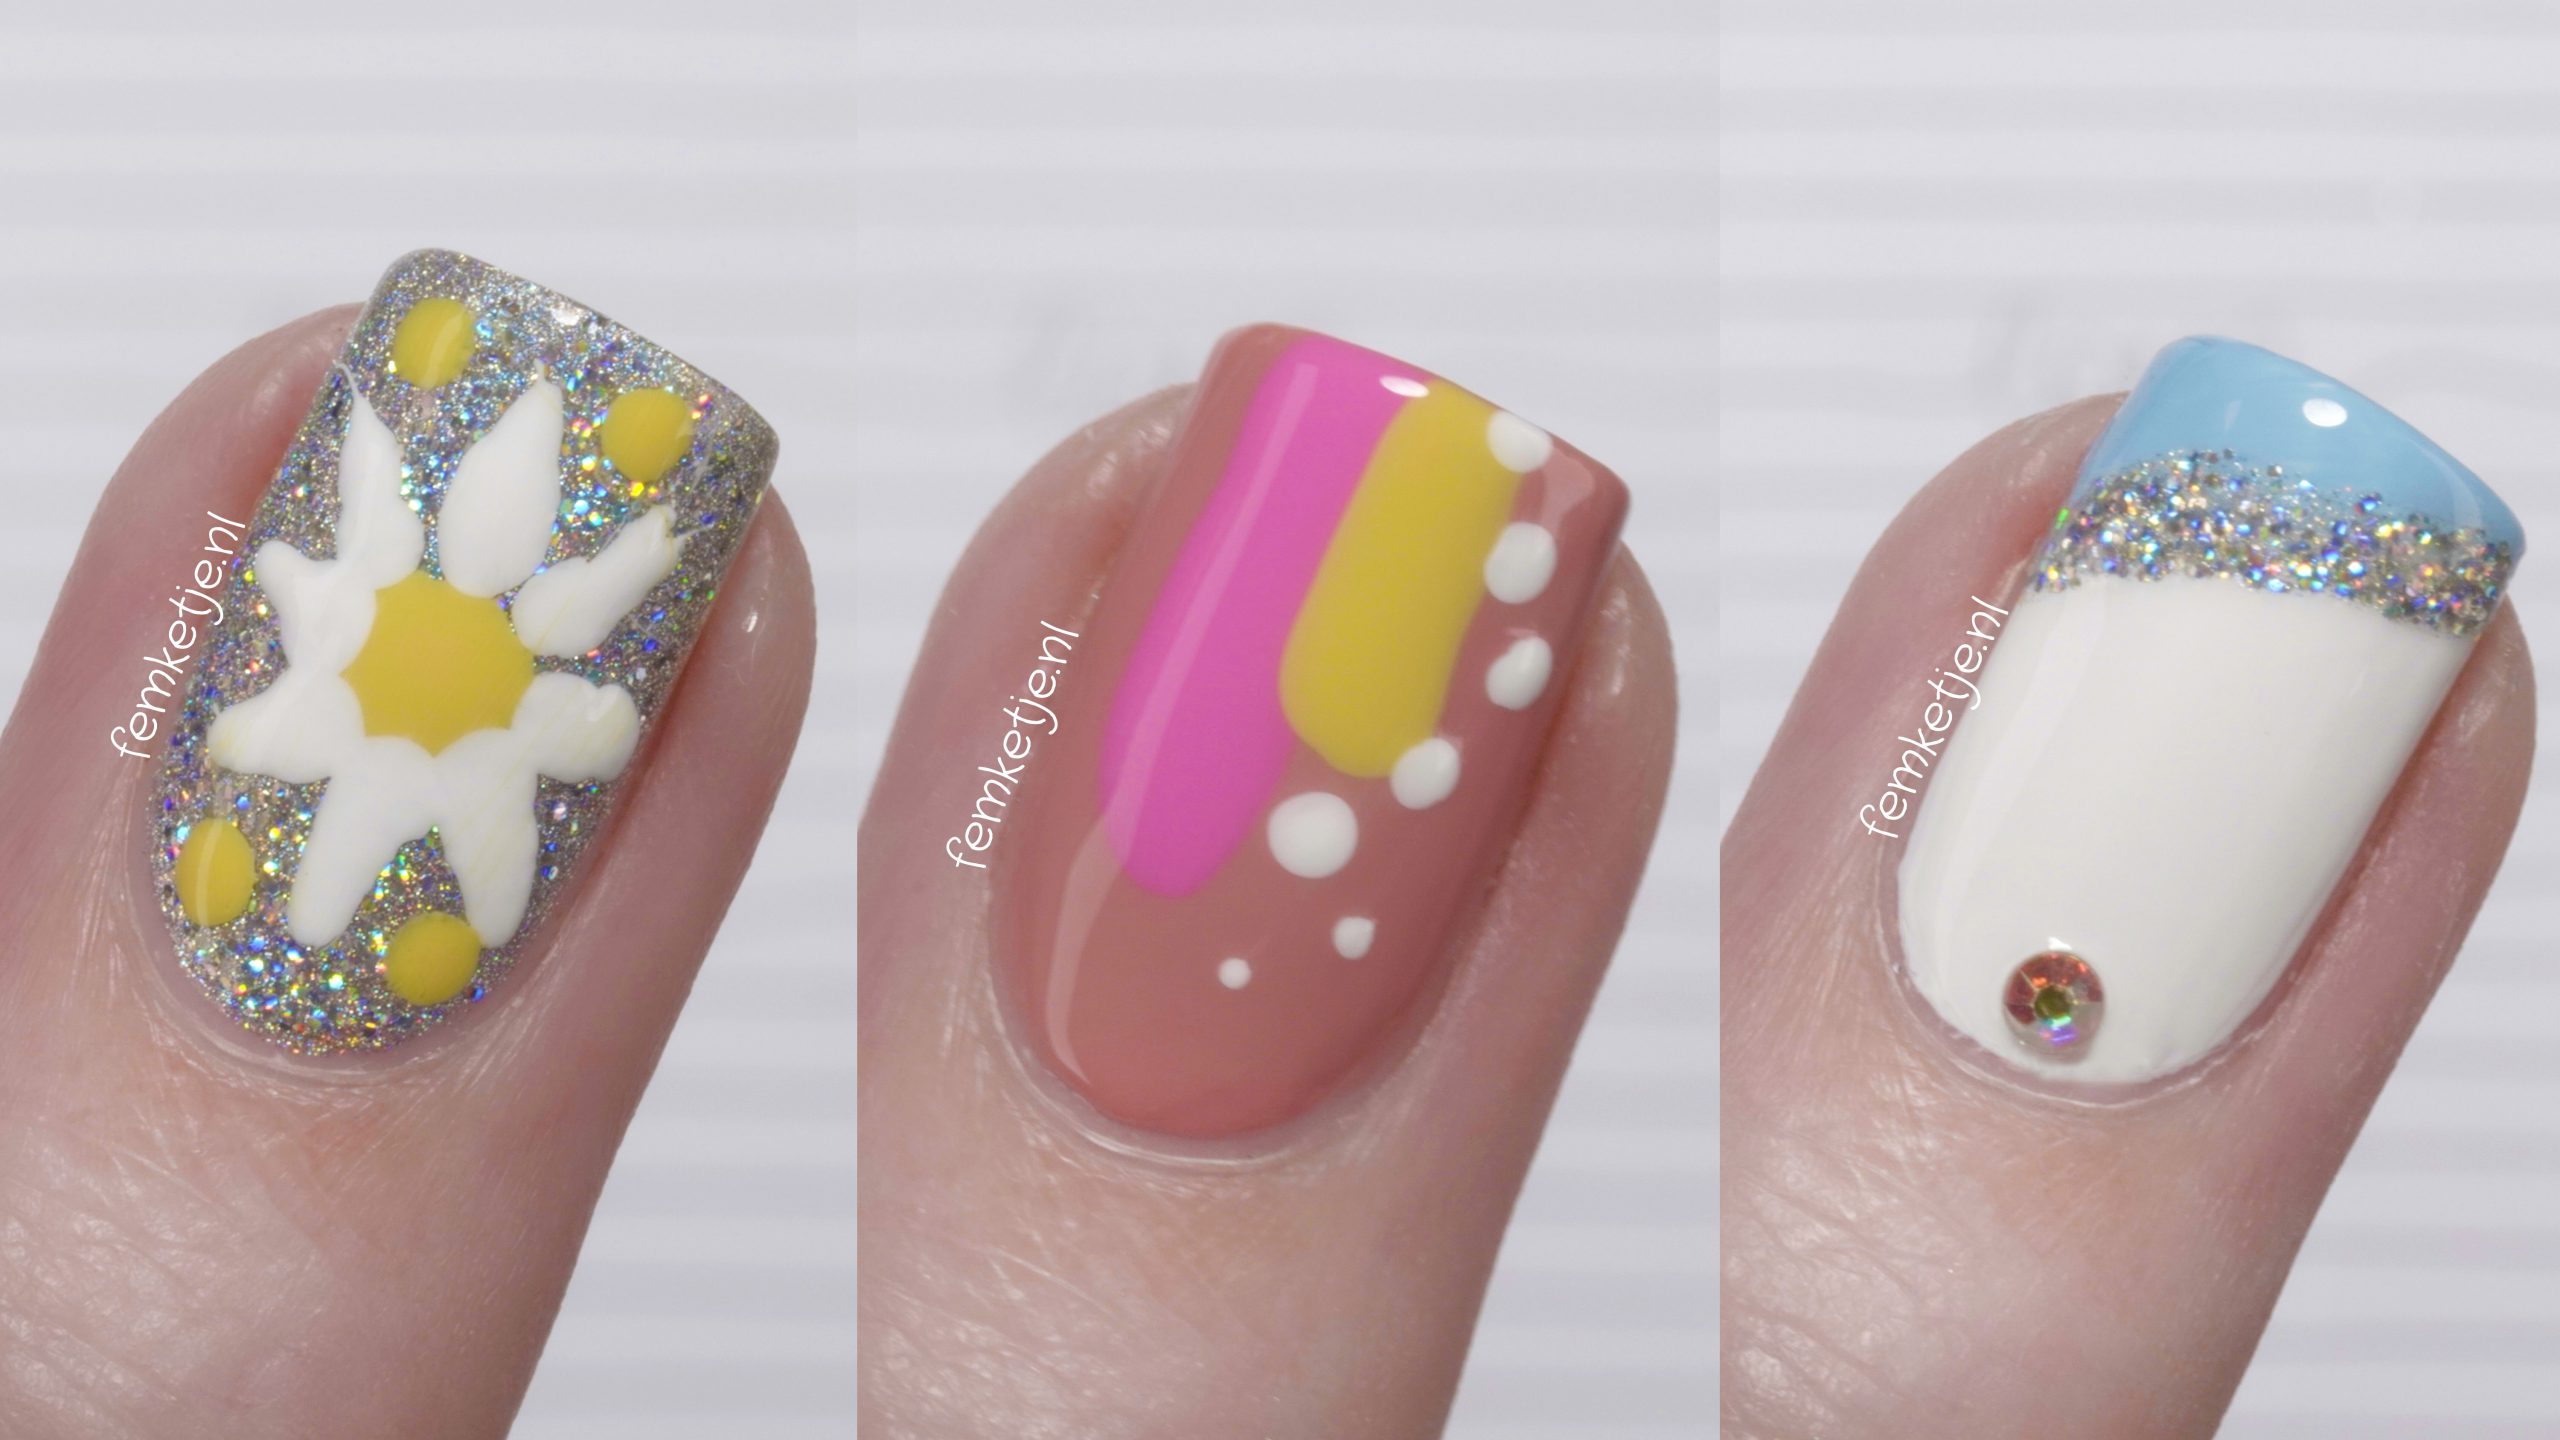 2. 20 Cute Short Nail Designs for 2021 - wide 5